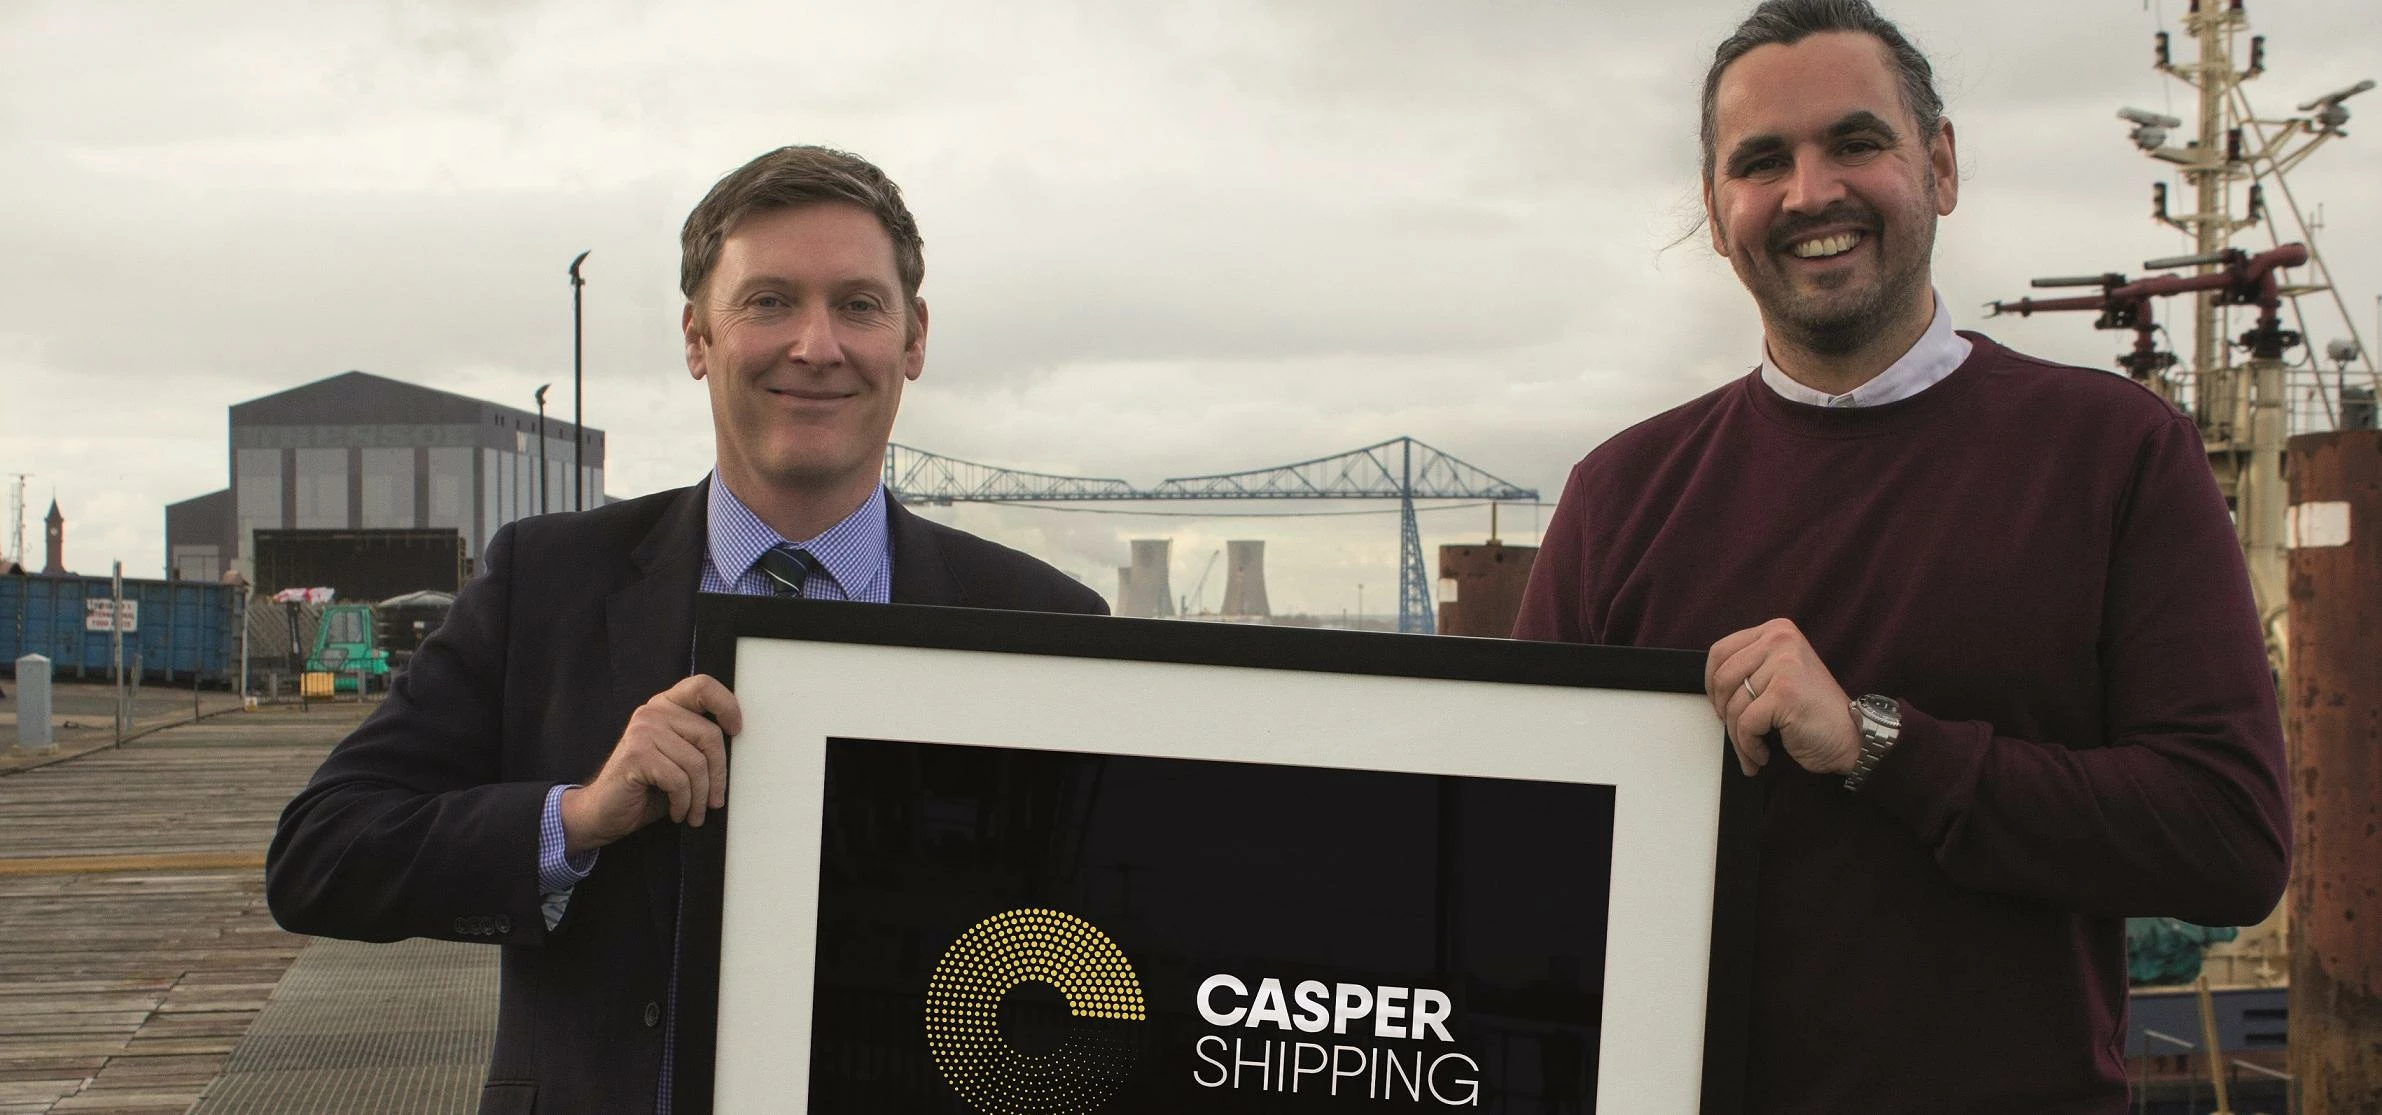 Michael Shakesheff (MD of Casper Shipping) and Mark Easby (MD of Better)